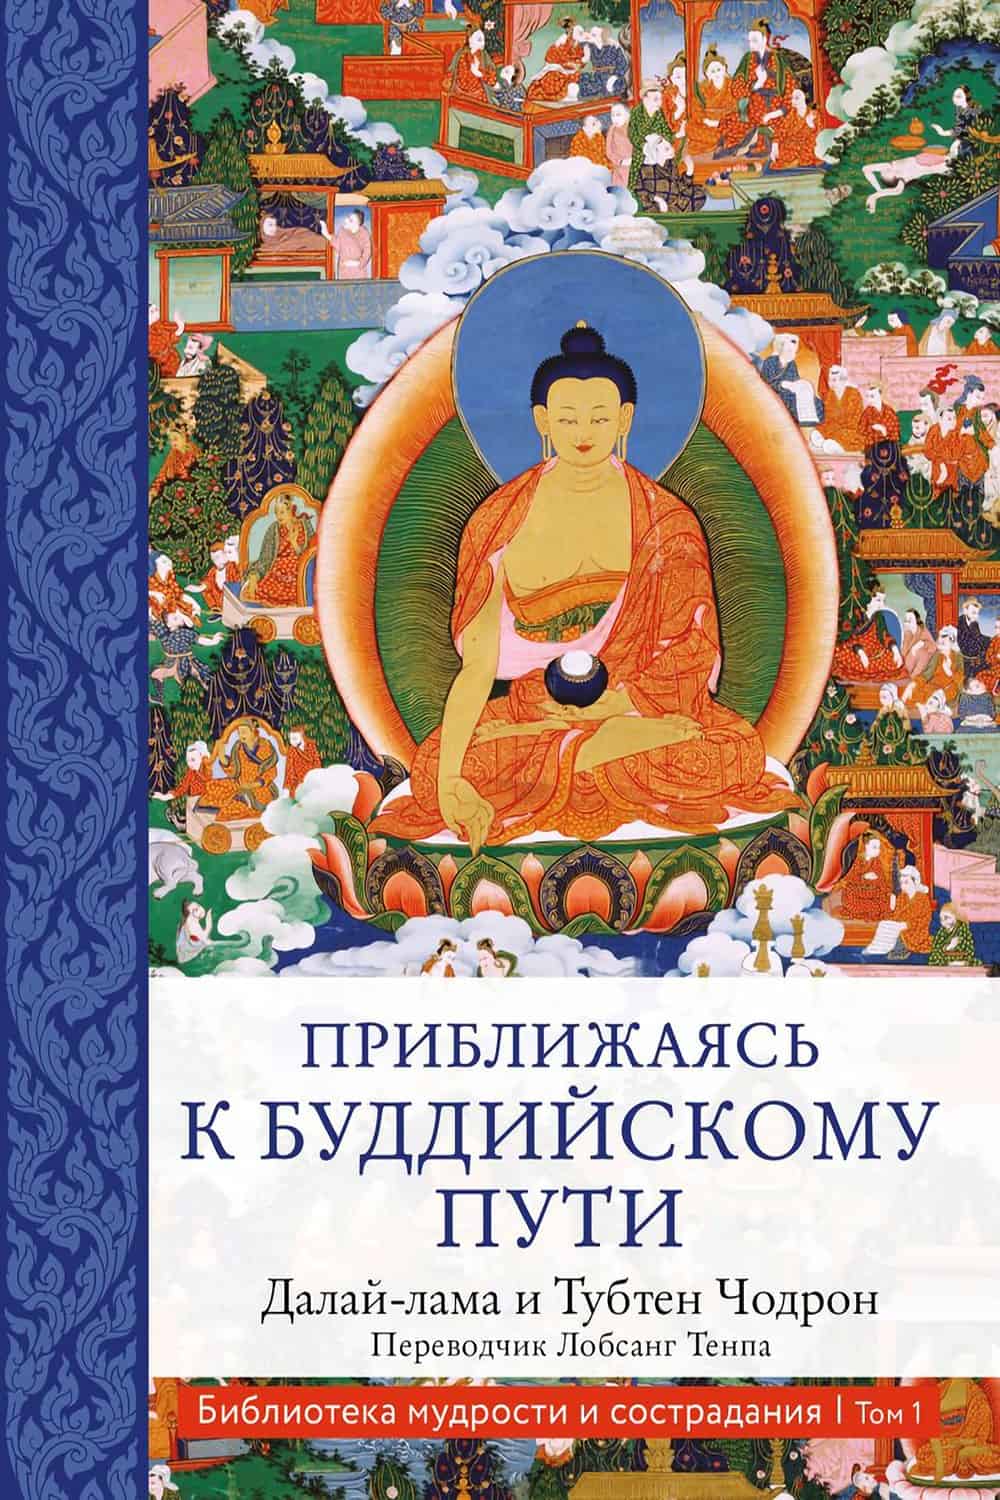 Book cover of Approaching the Buddhist Path in Russian